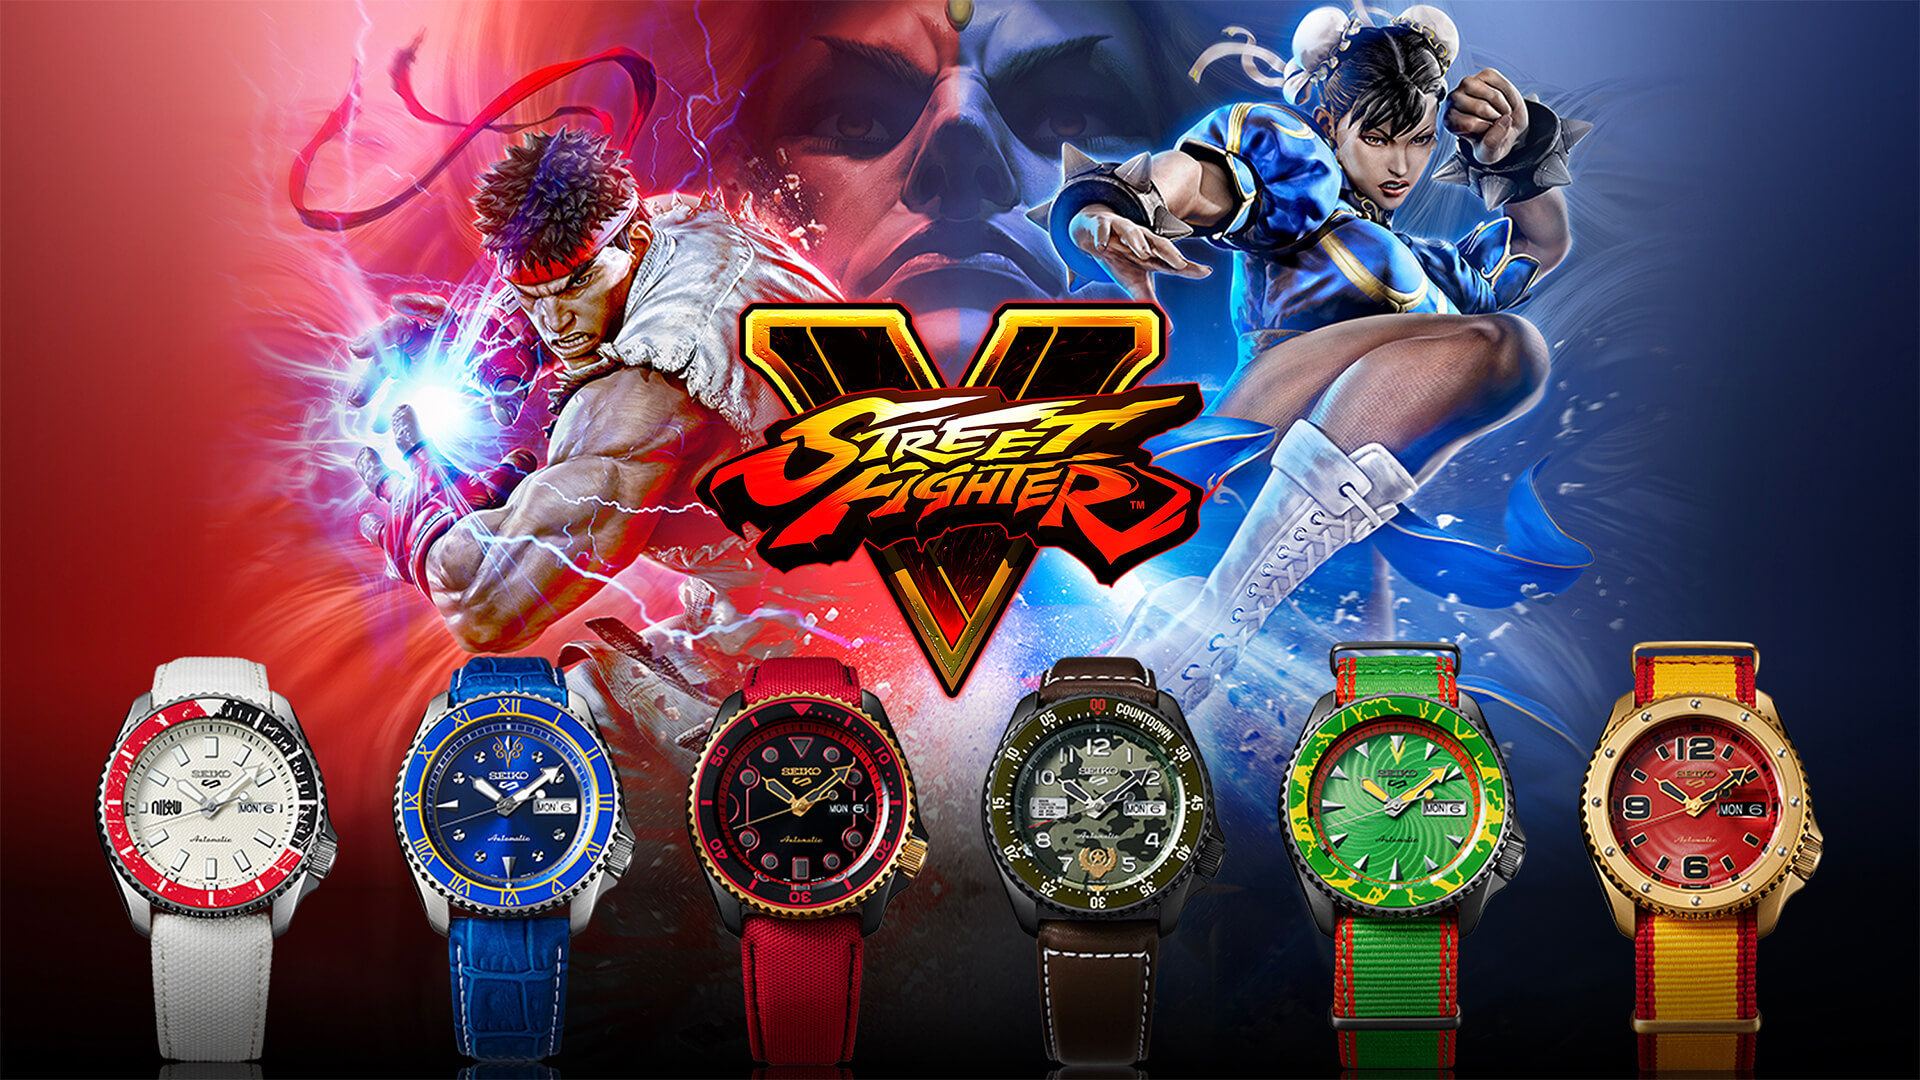 Seiko Partners With Fighter” Series For Six Limited-Edition Models | aBlogtoWatch